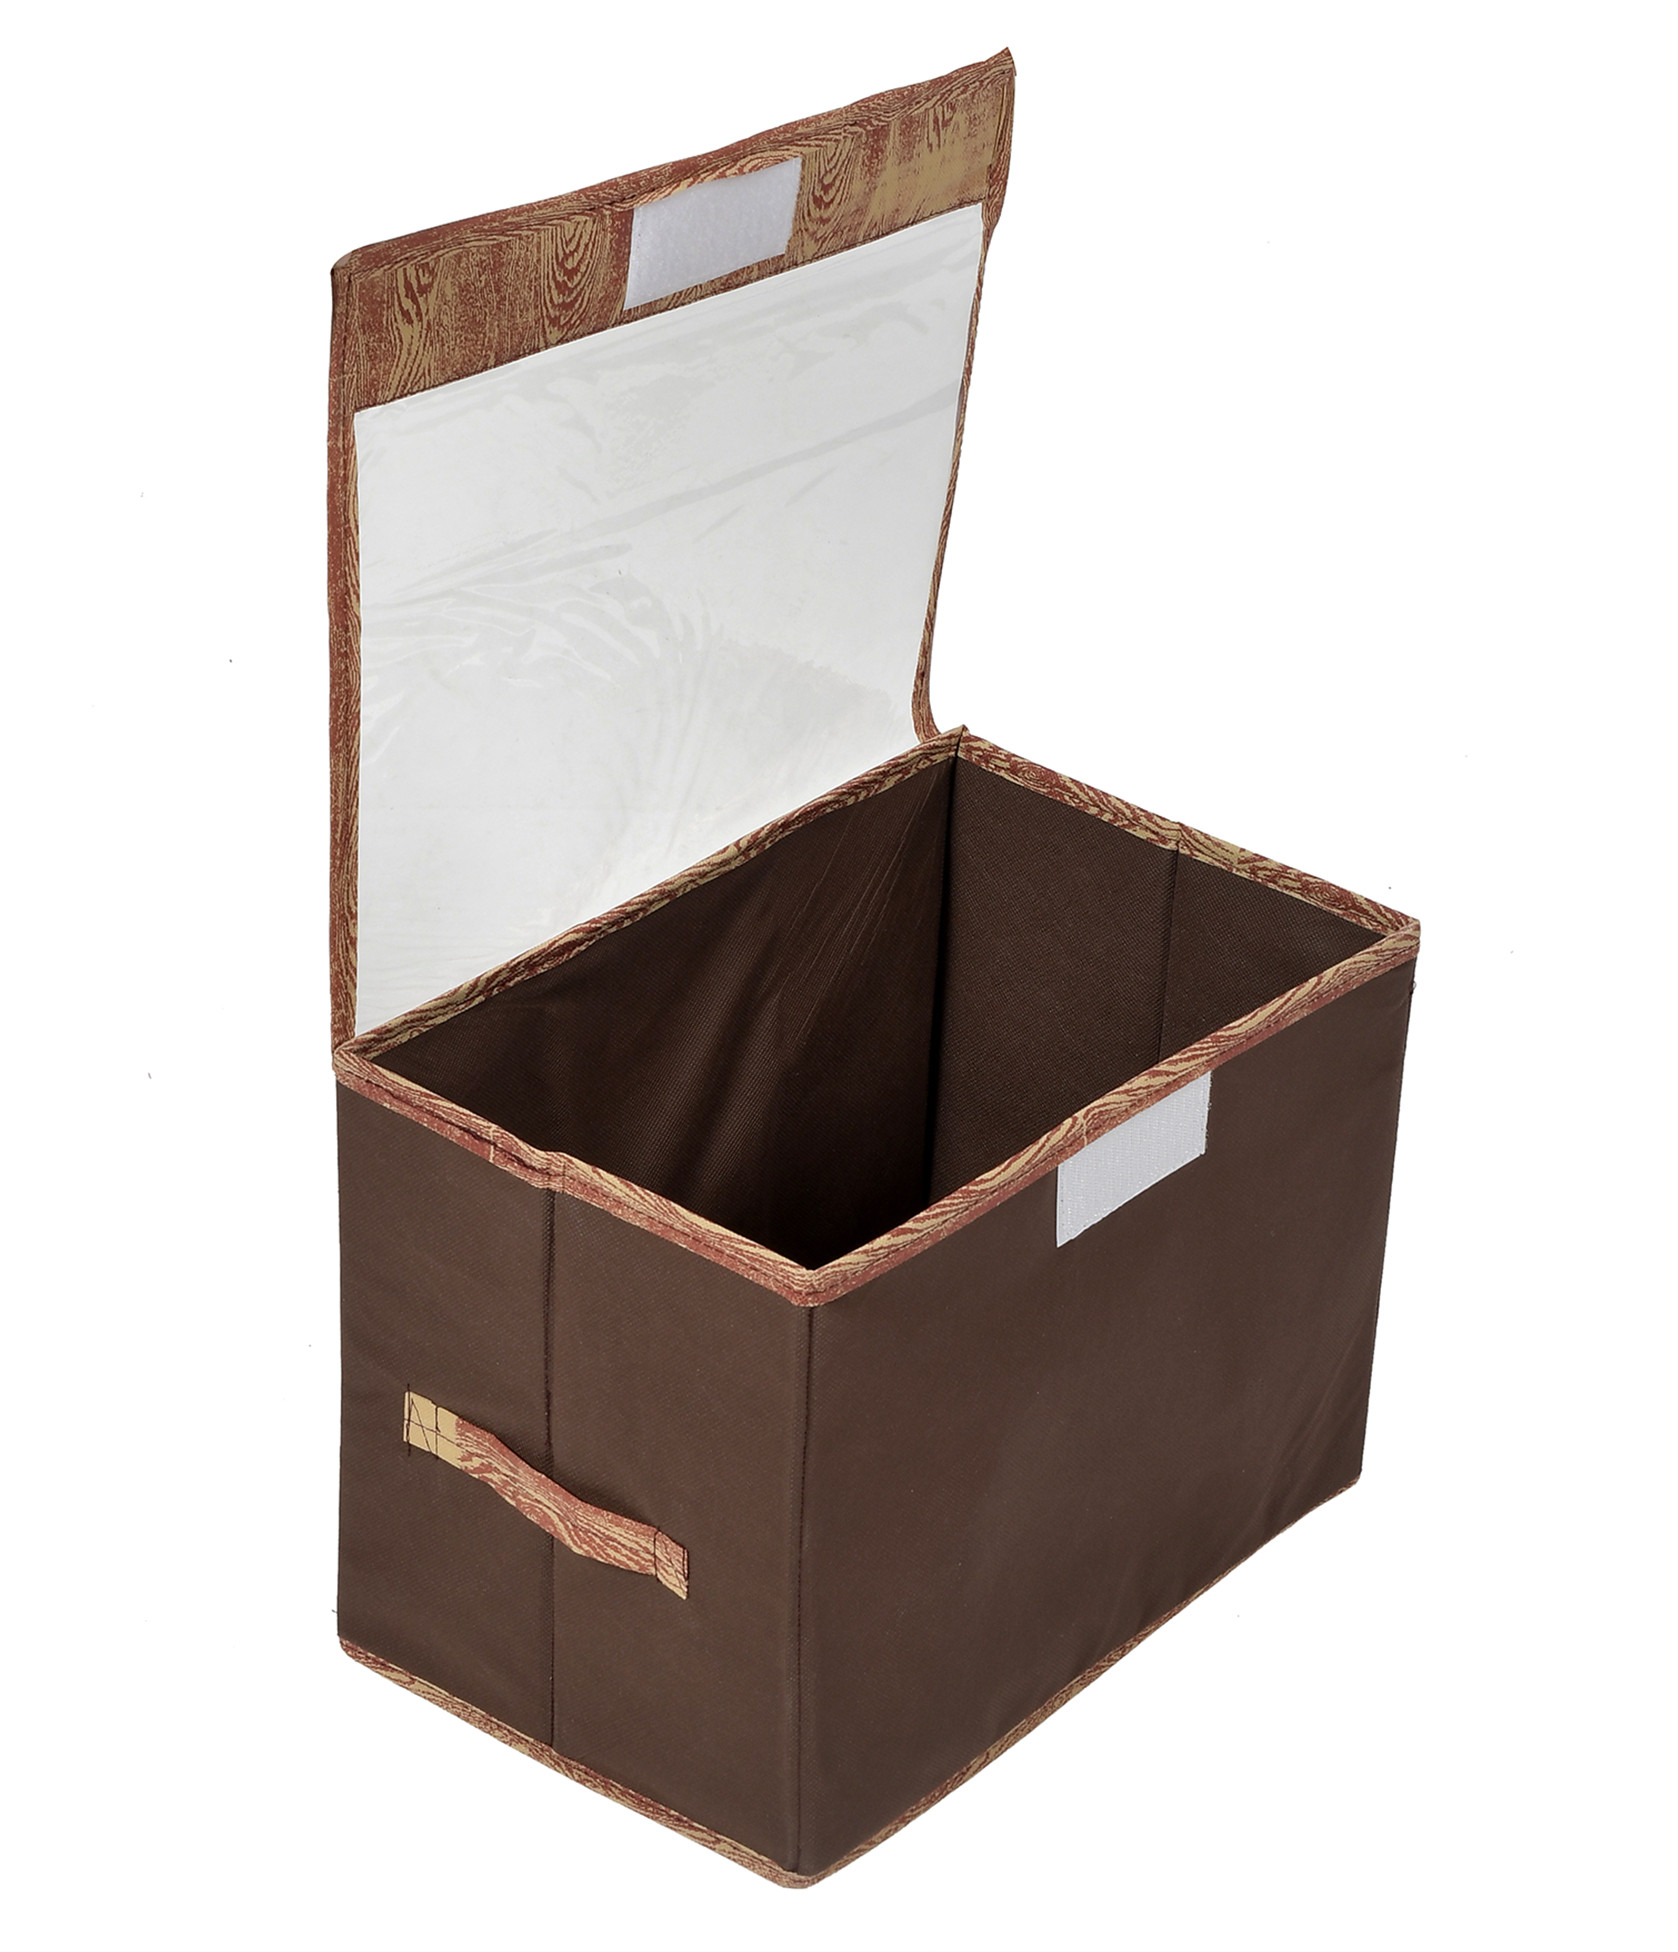 Kuber Industries Wooden Design Multiuses Large Non-Woven Storage Box/Organizer With Tranasparent Lid (Brown) -44KM0441